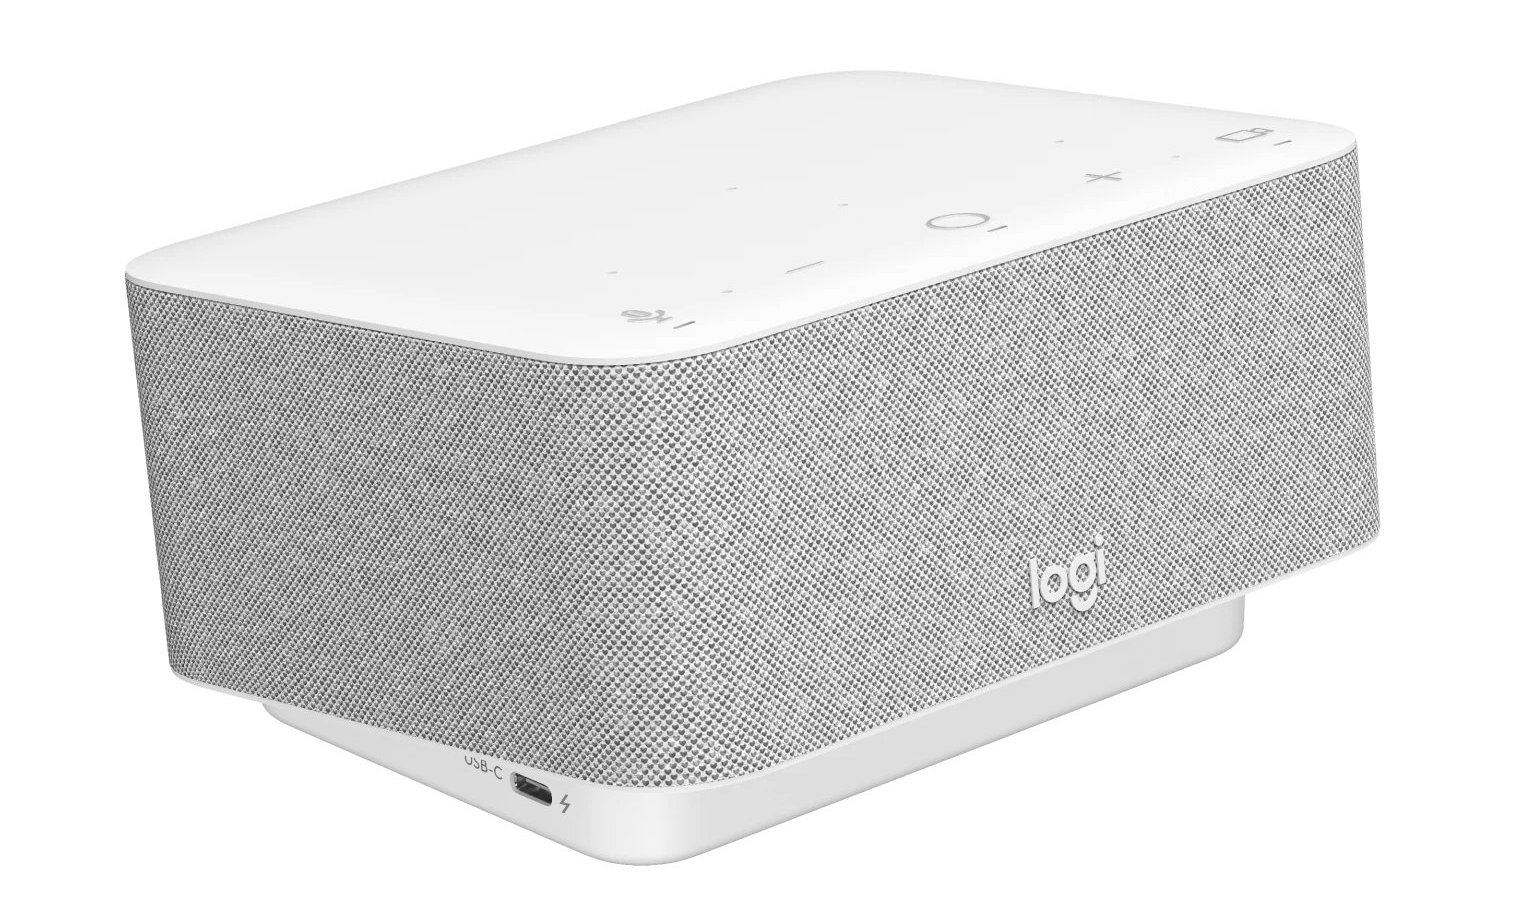 Logi Dock - USB-C dock for remote working and video calls